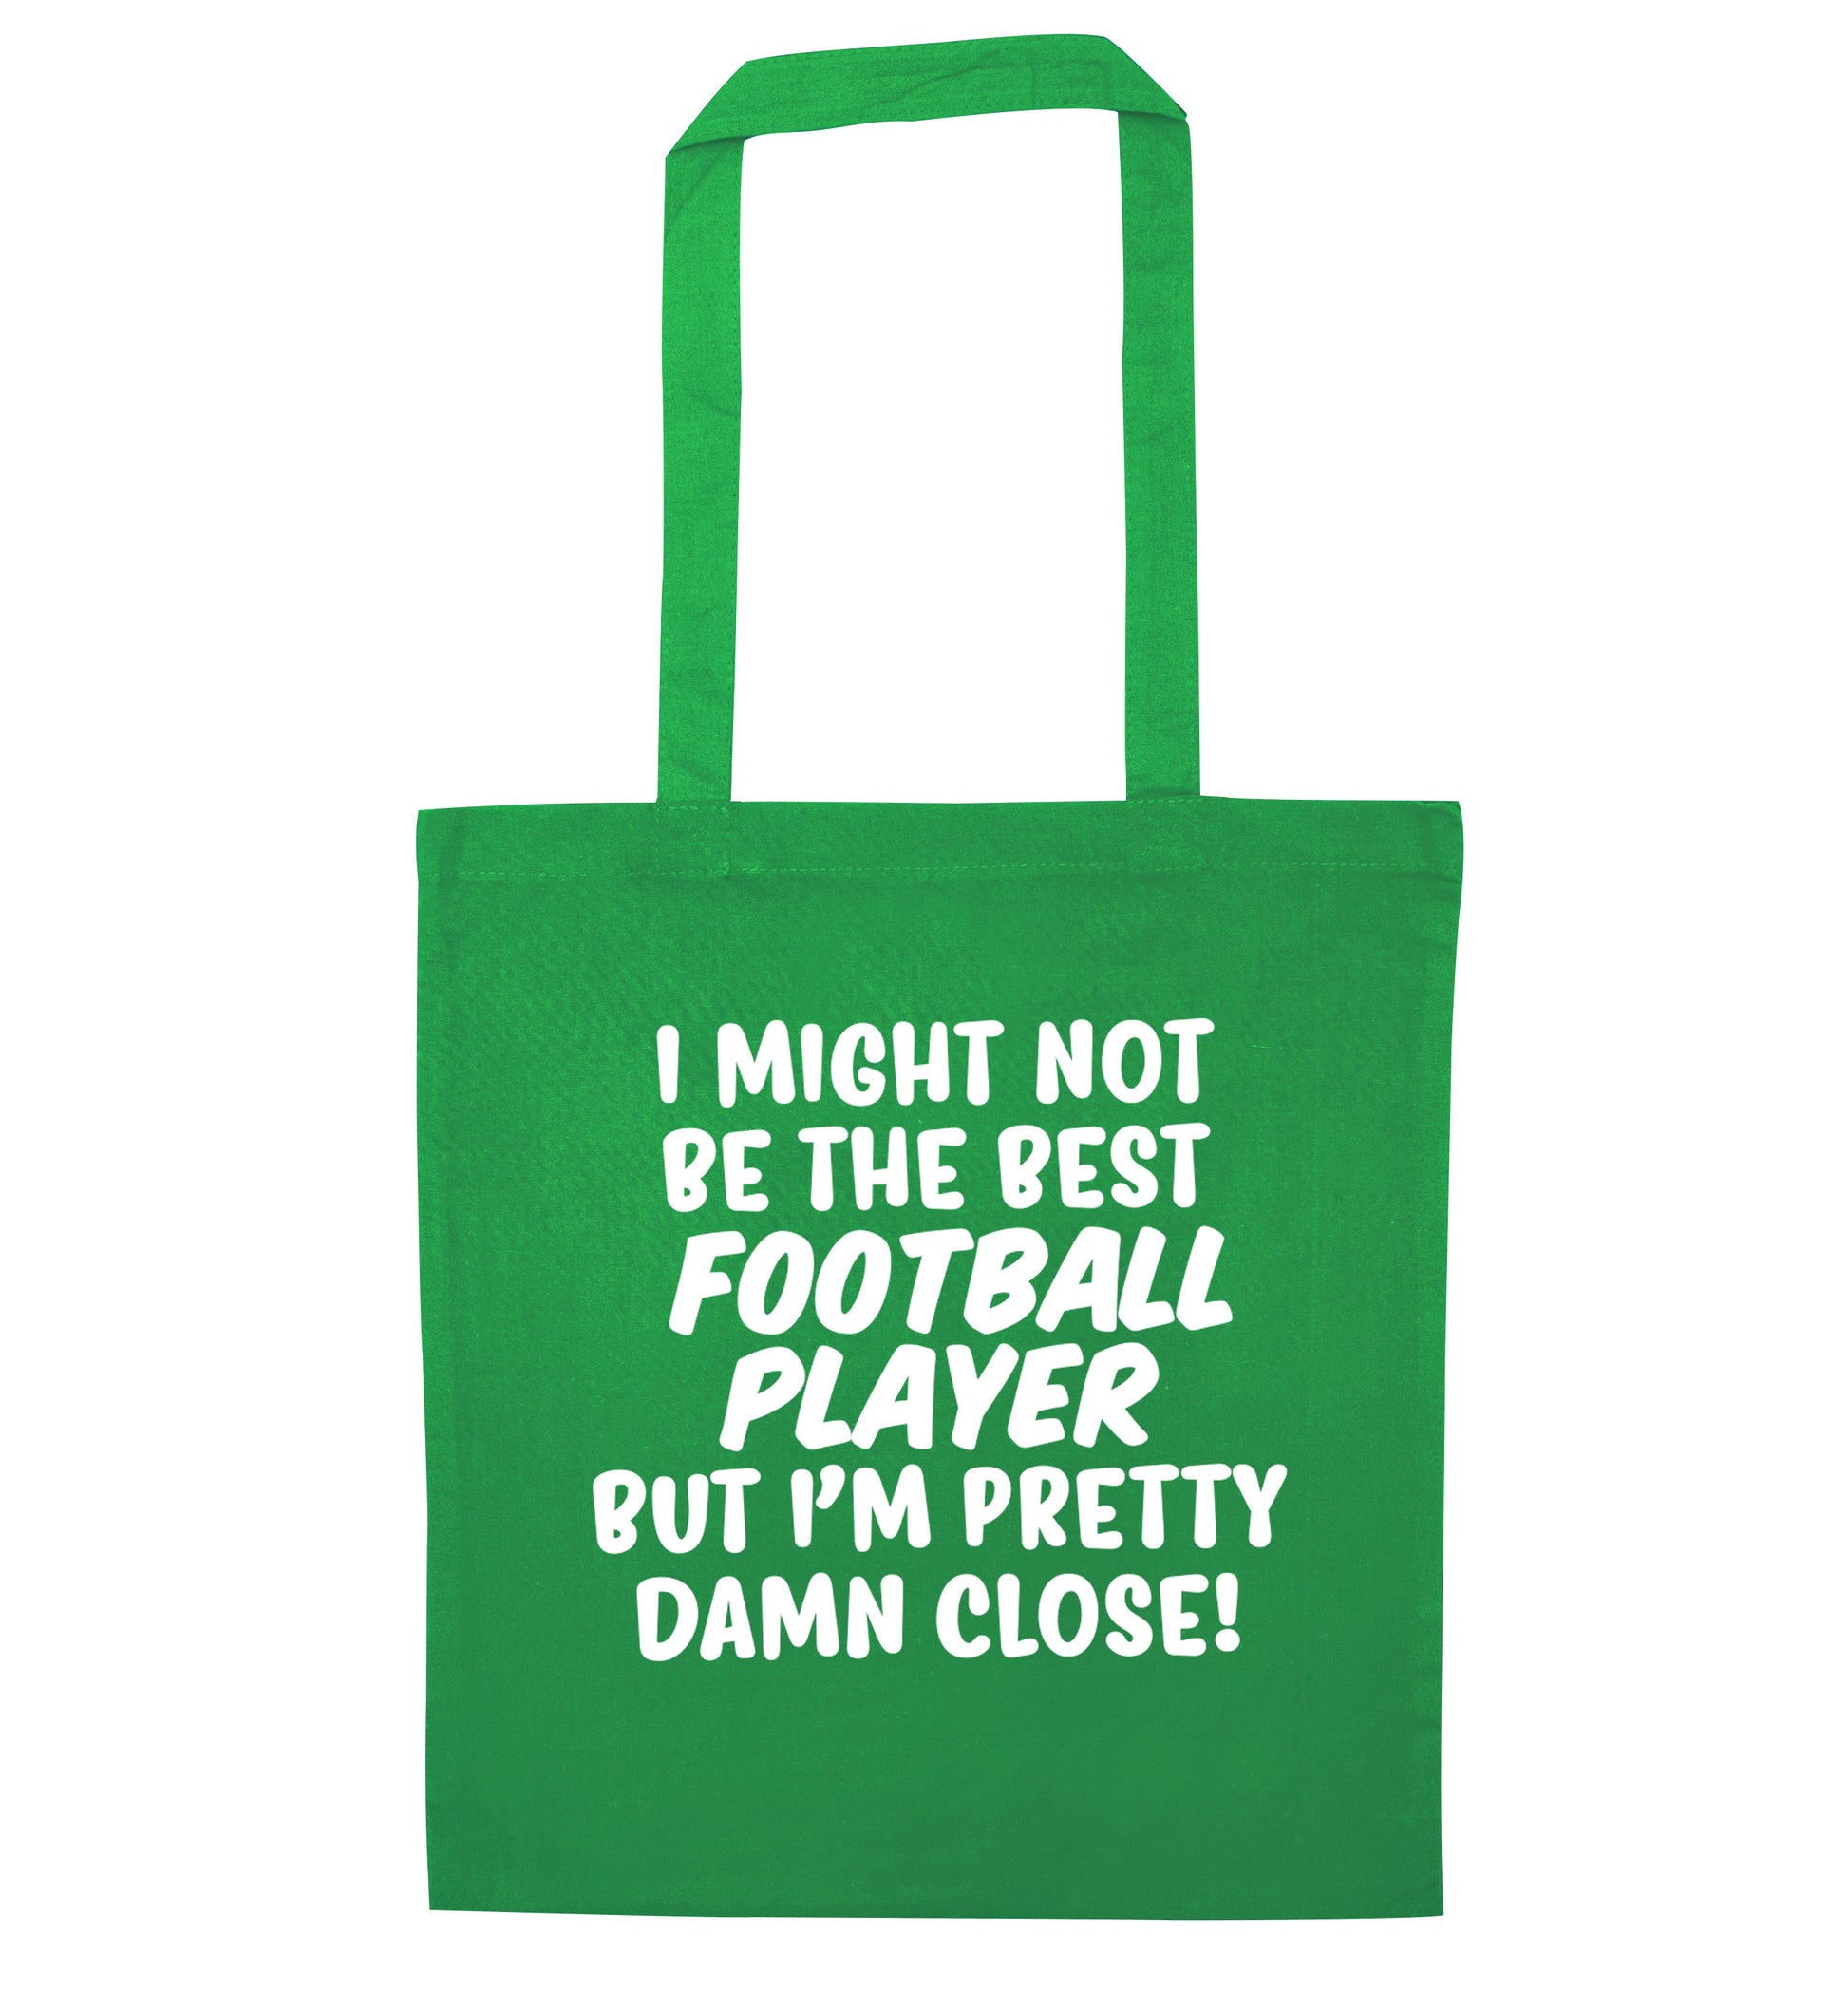 I might not be the best football player but I'm pretty close! green tote bag